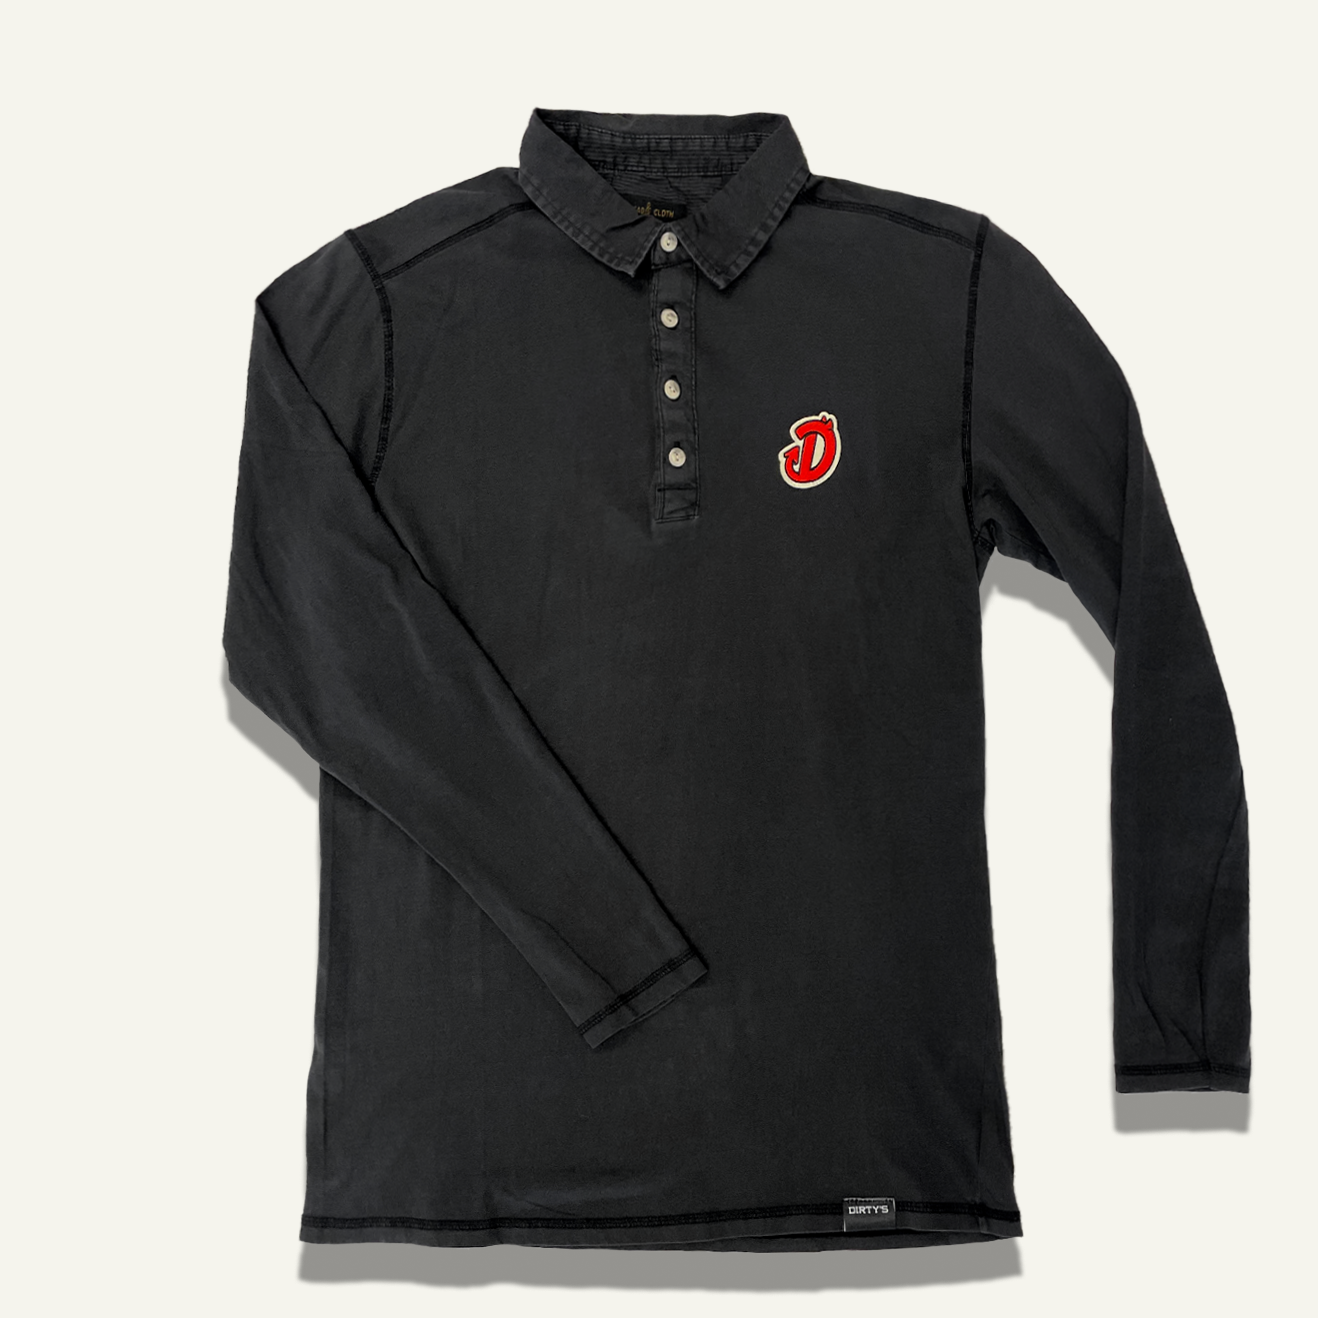 Dirty’s “D” Polo — L/S